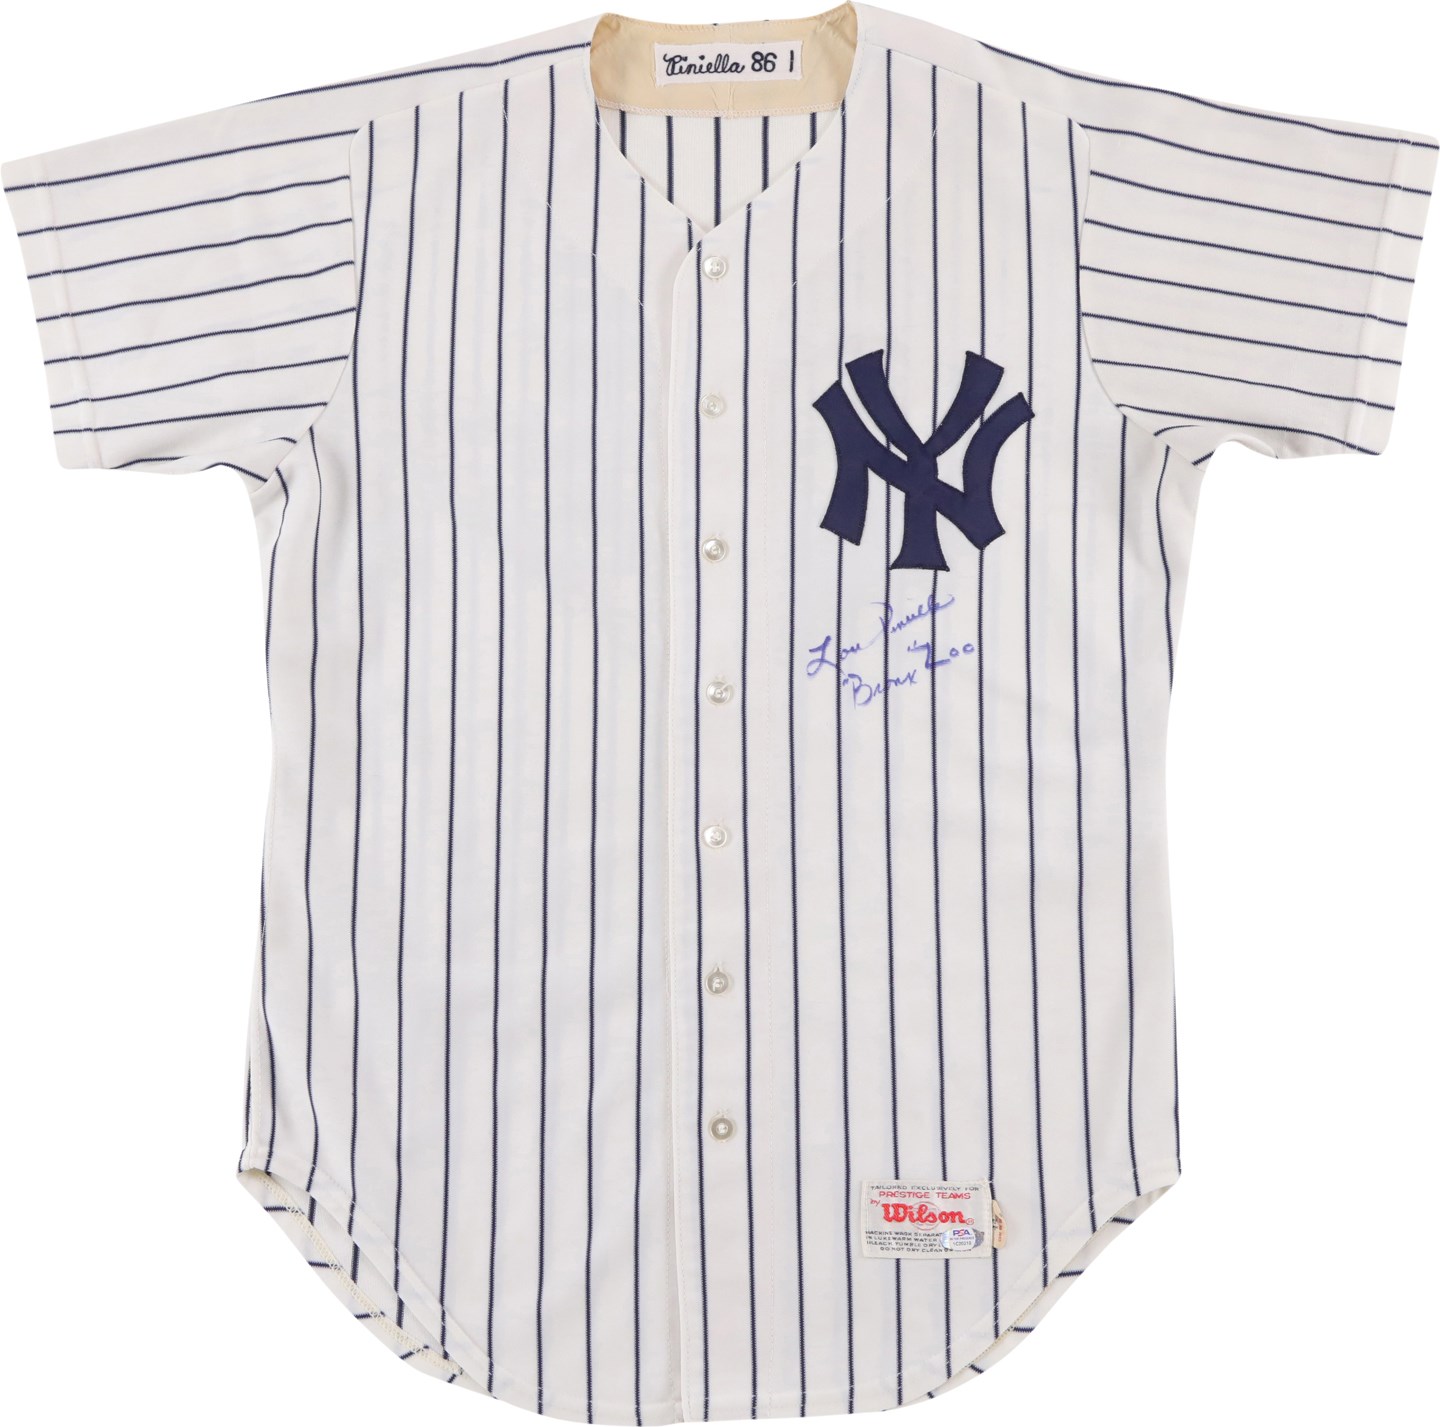 - 1986 Lou Piniella New York Yankees Signed Game Worn Jersey (Photo-Matched to EIGHT Images)